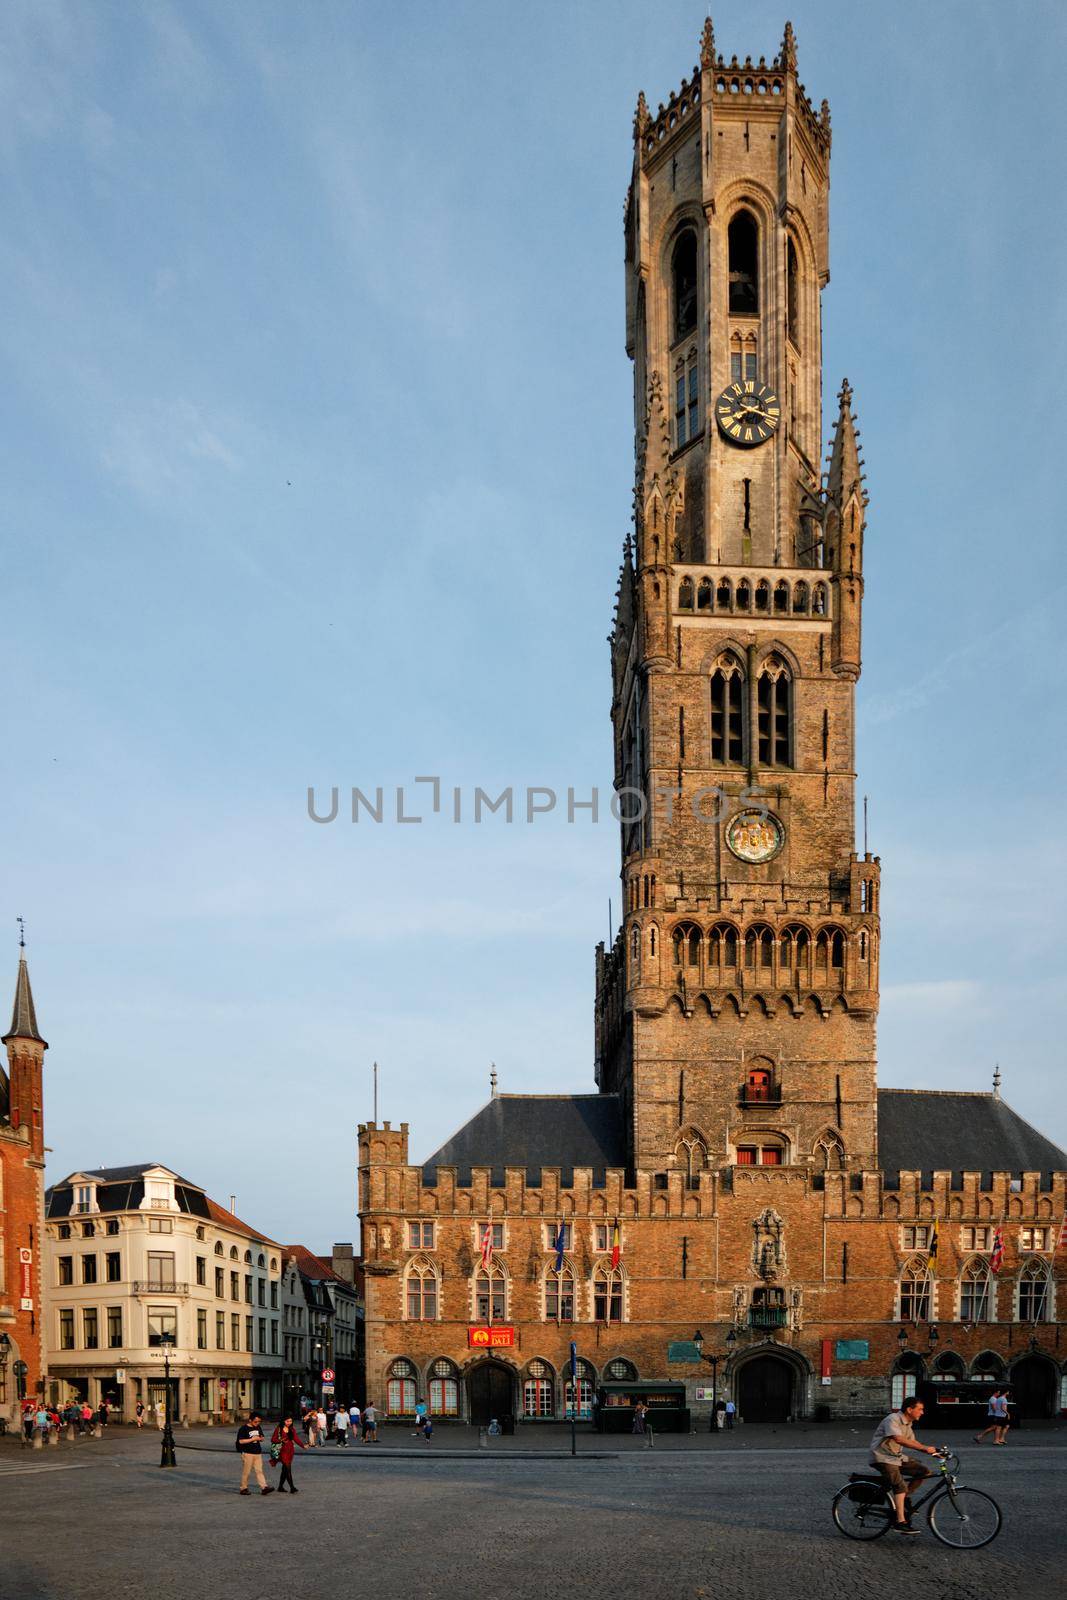 Belfry tower and Grote markt square in Bruges, Belgium on sunset by dimol